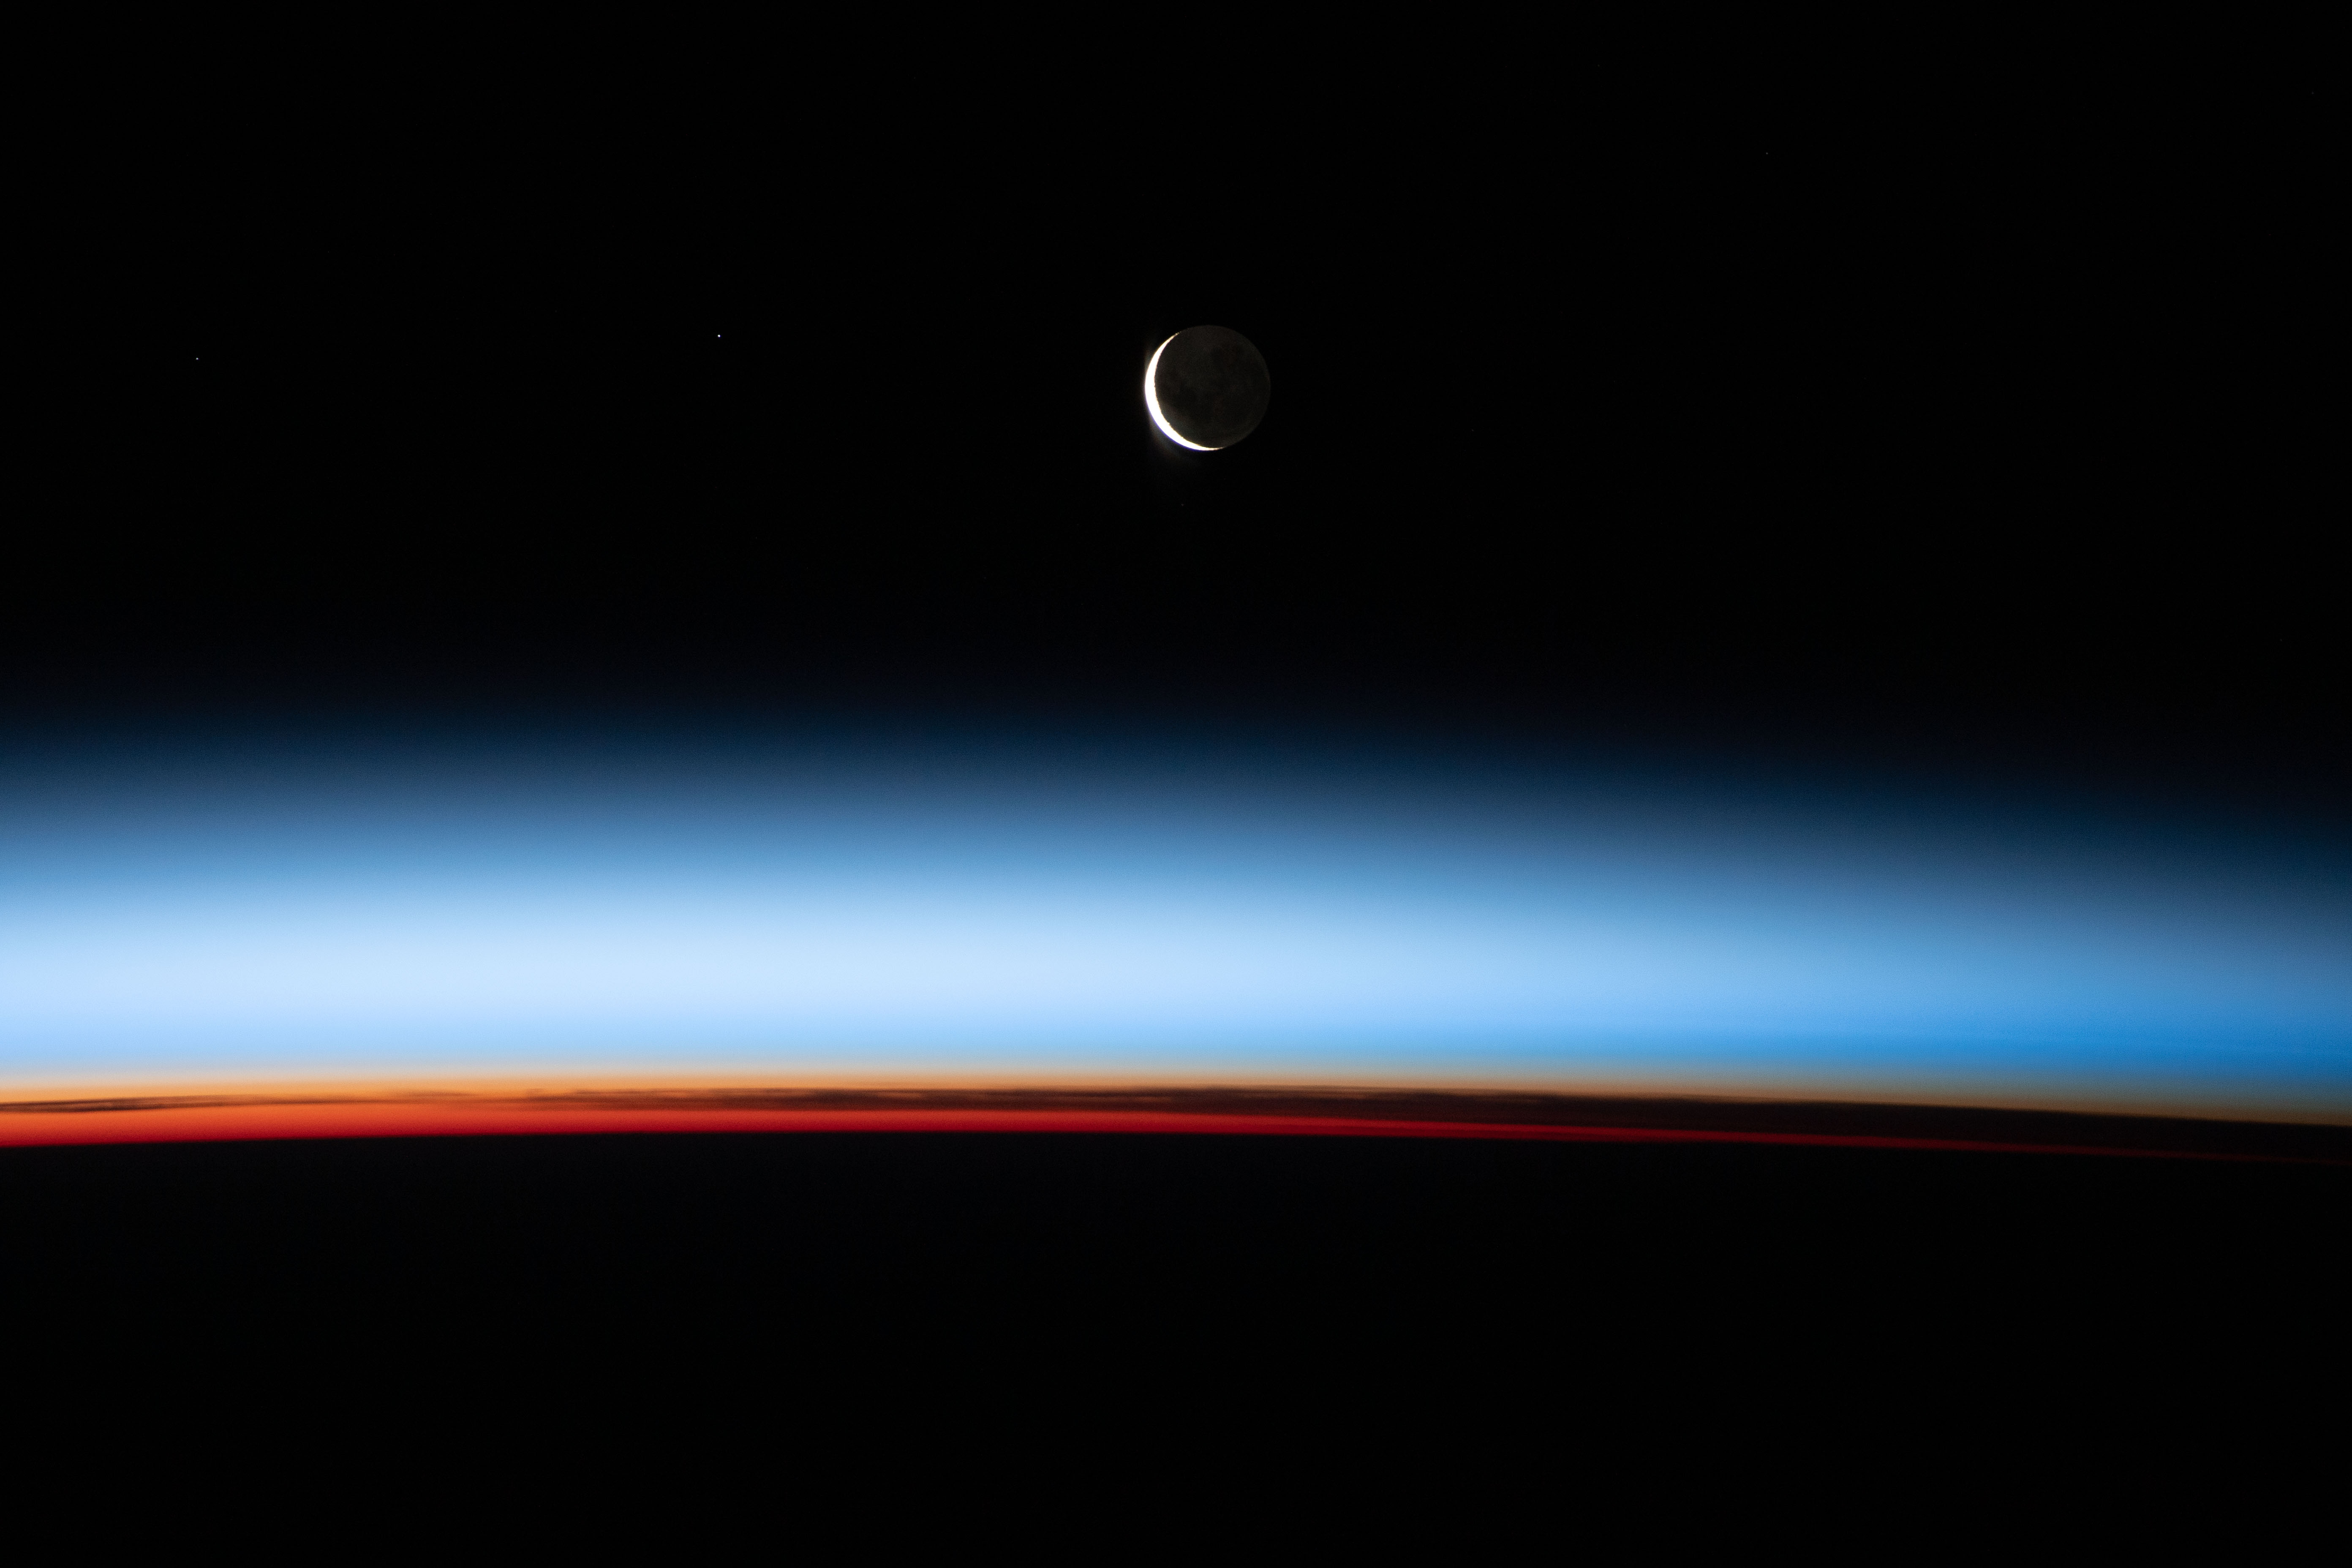 Photograph of a crescent Moon over a rainbow curved atmosphere. 